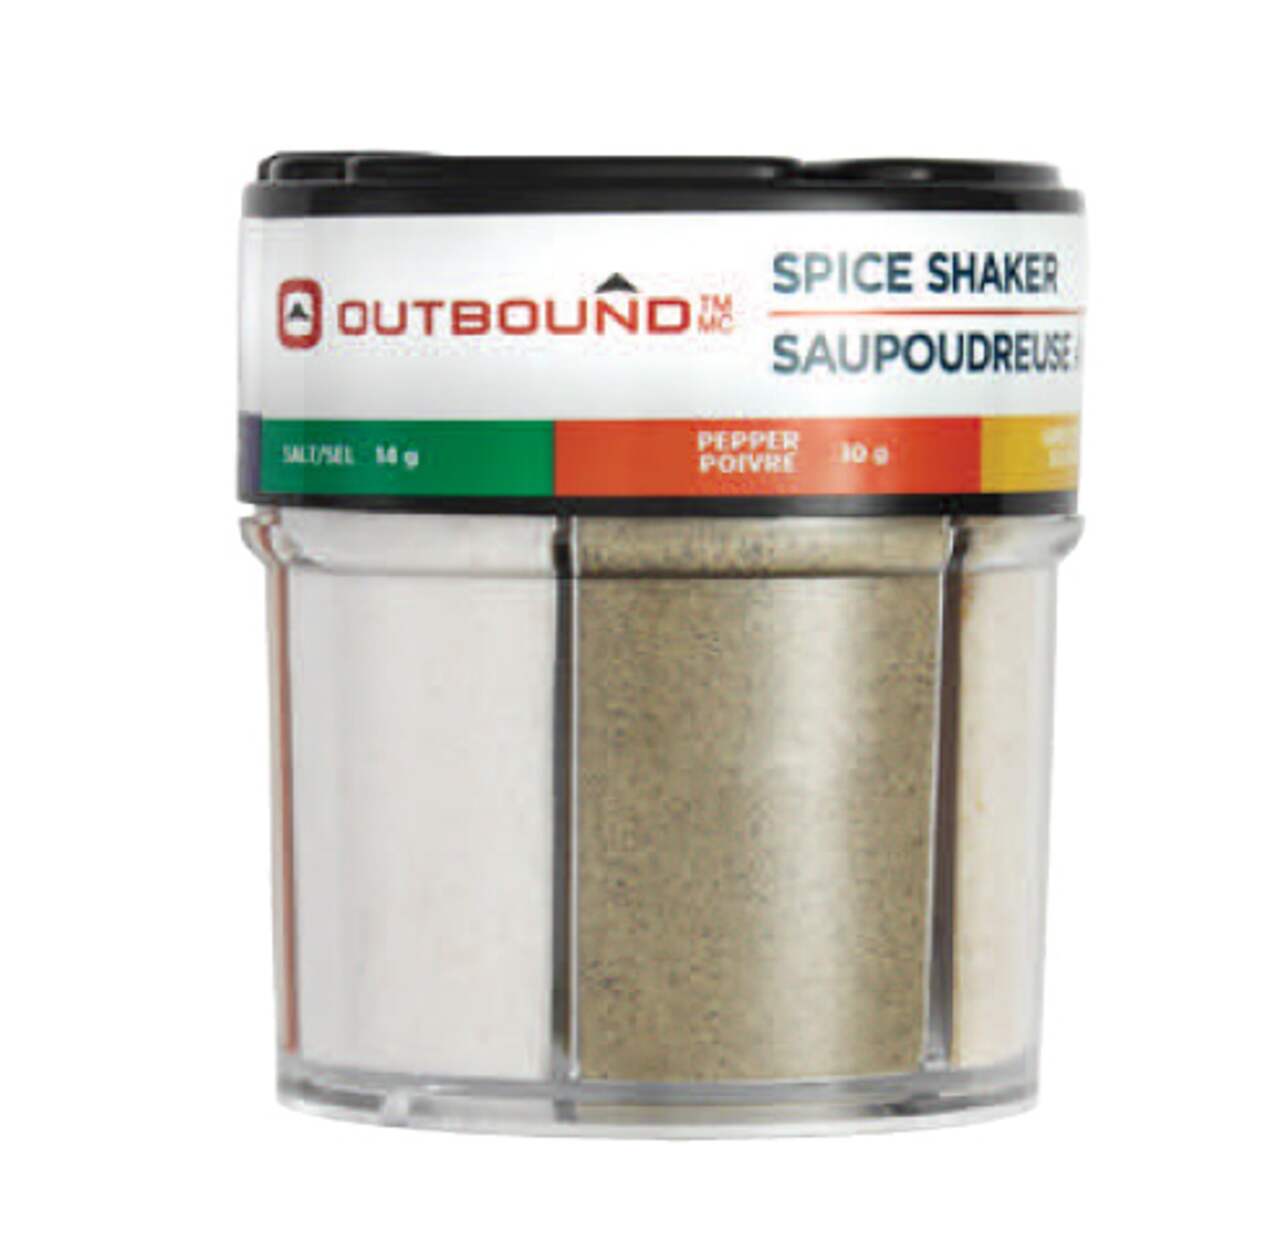 Campfire Cooking Spice and Seasoning Set – Travel Spice Kit